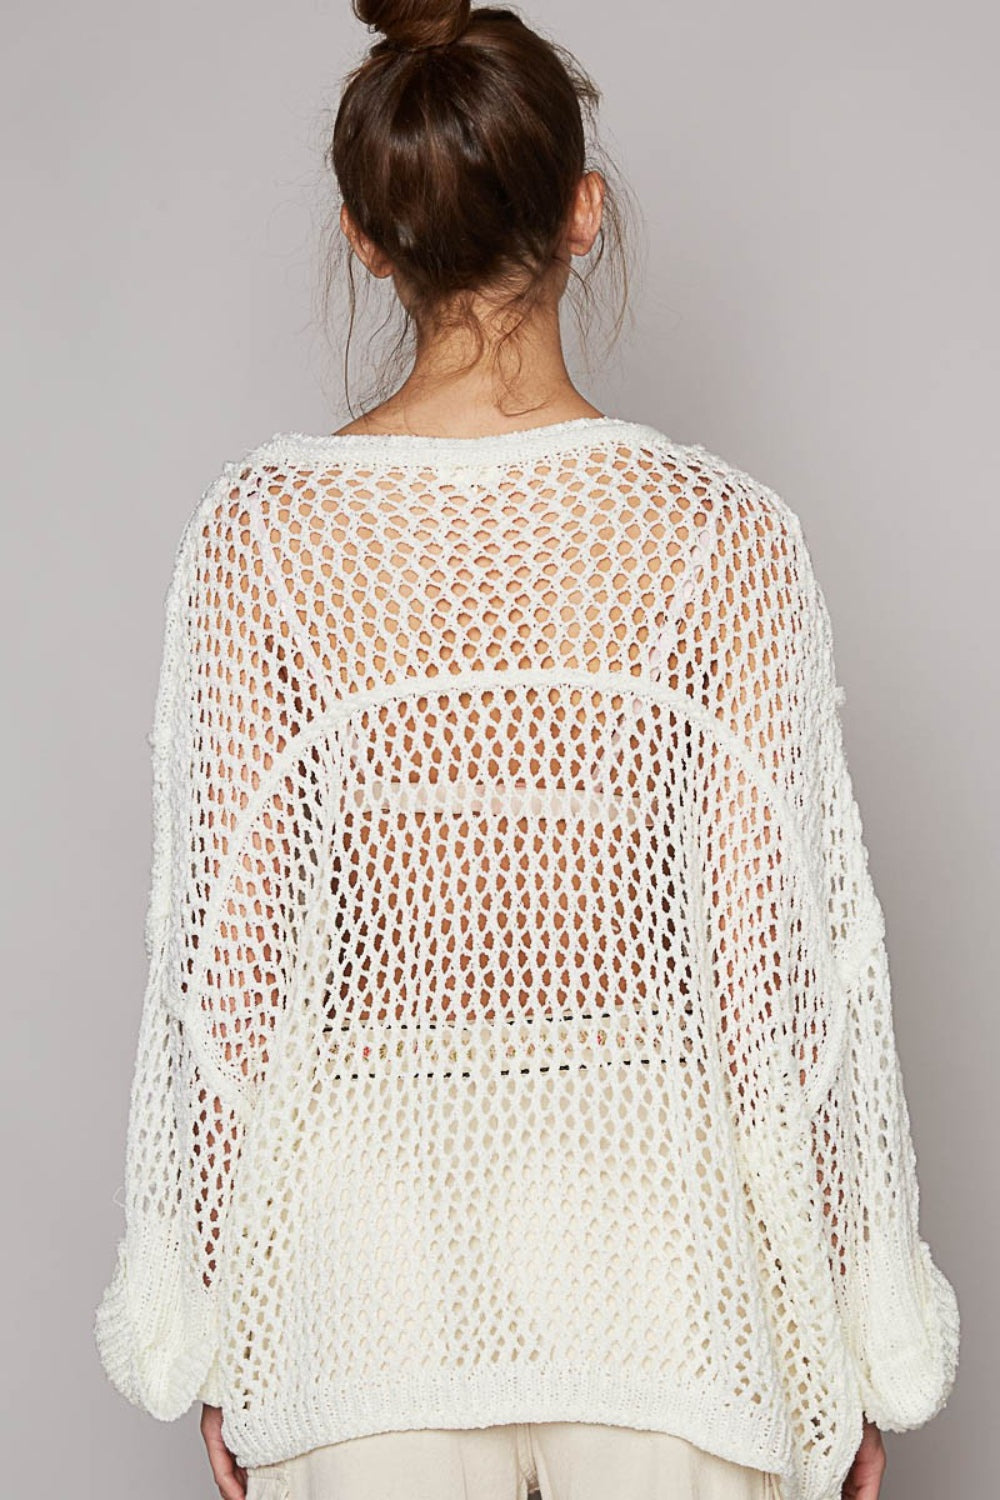 Openwork Long Sleeve Knit Cover Up for Women | Cover Ups | Ro + Ivy